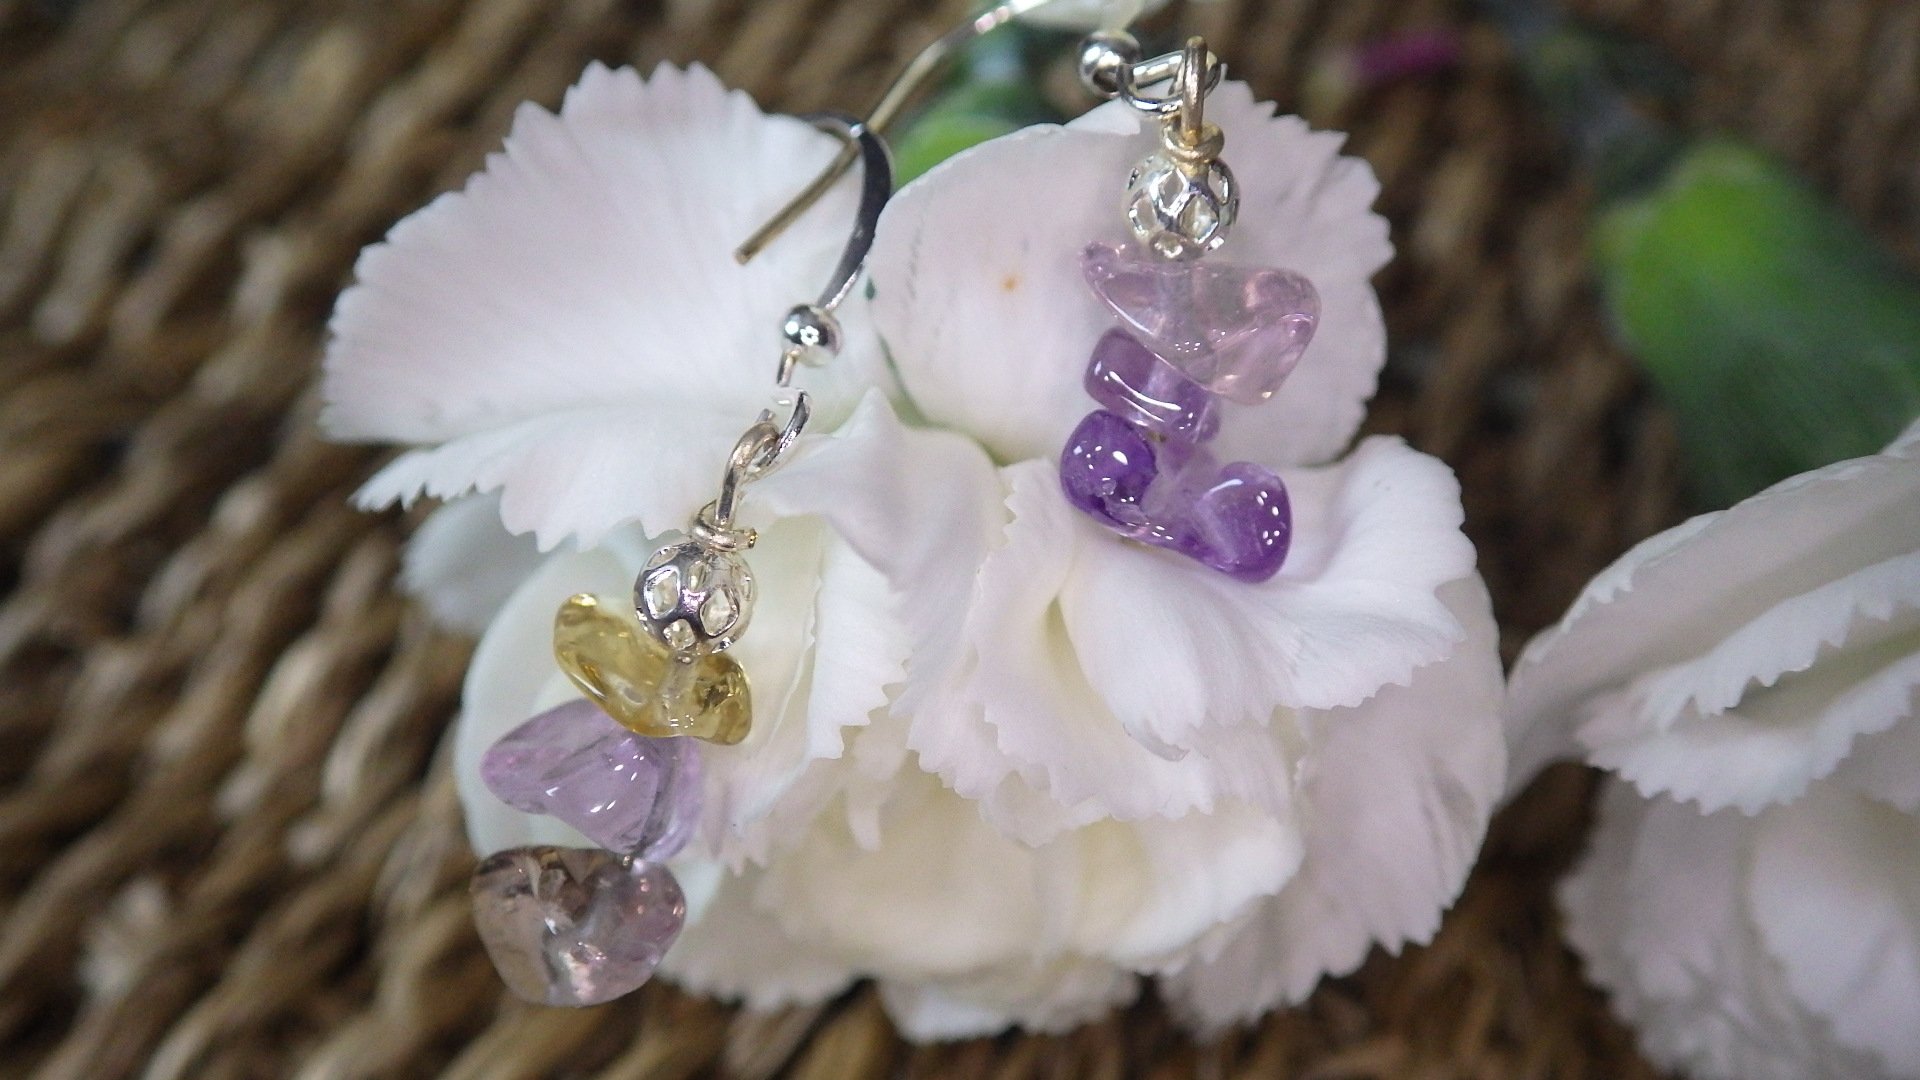  Ametrine with silver findings  $12.95 